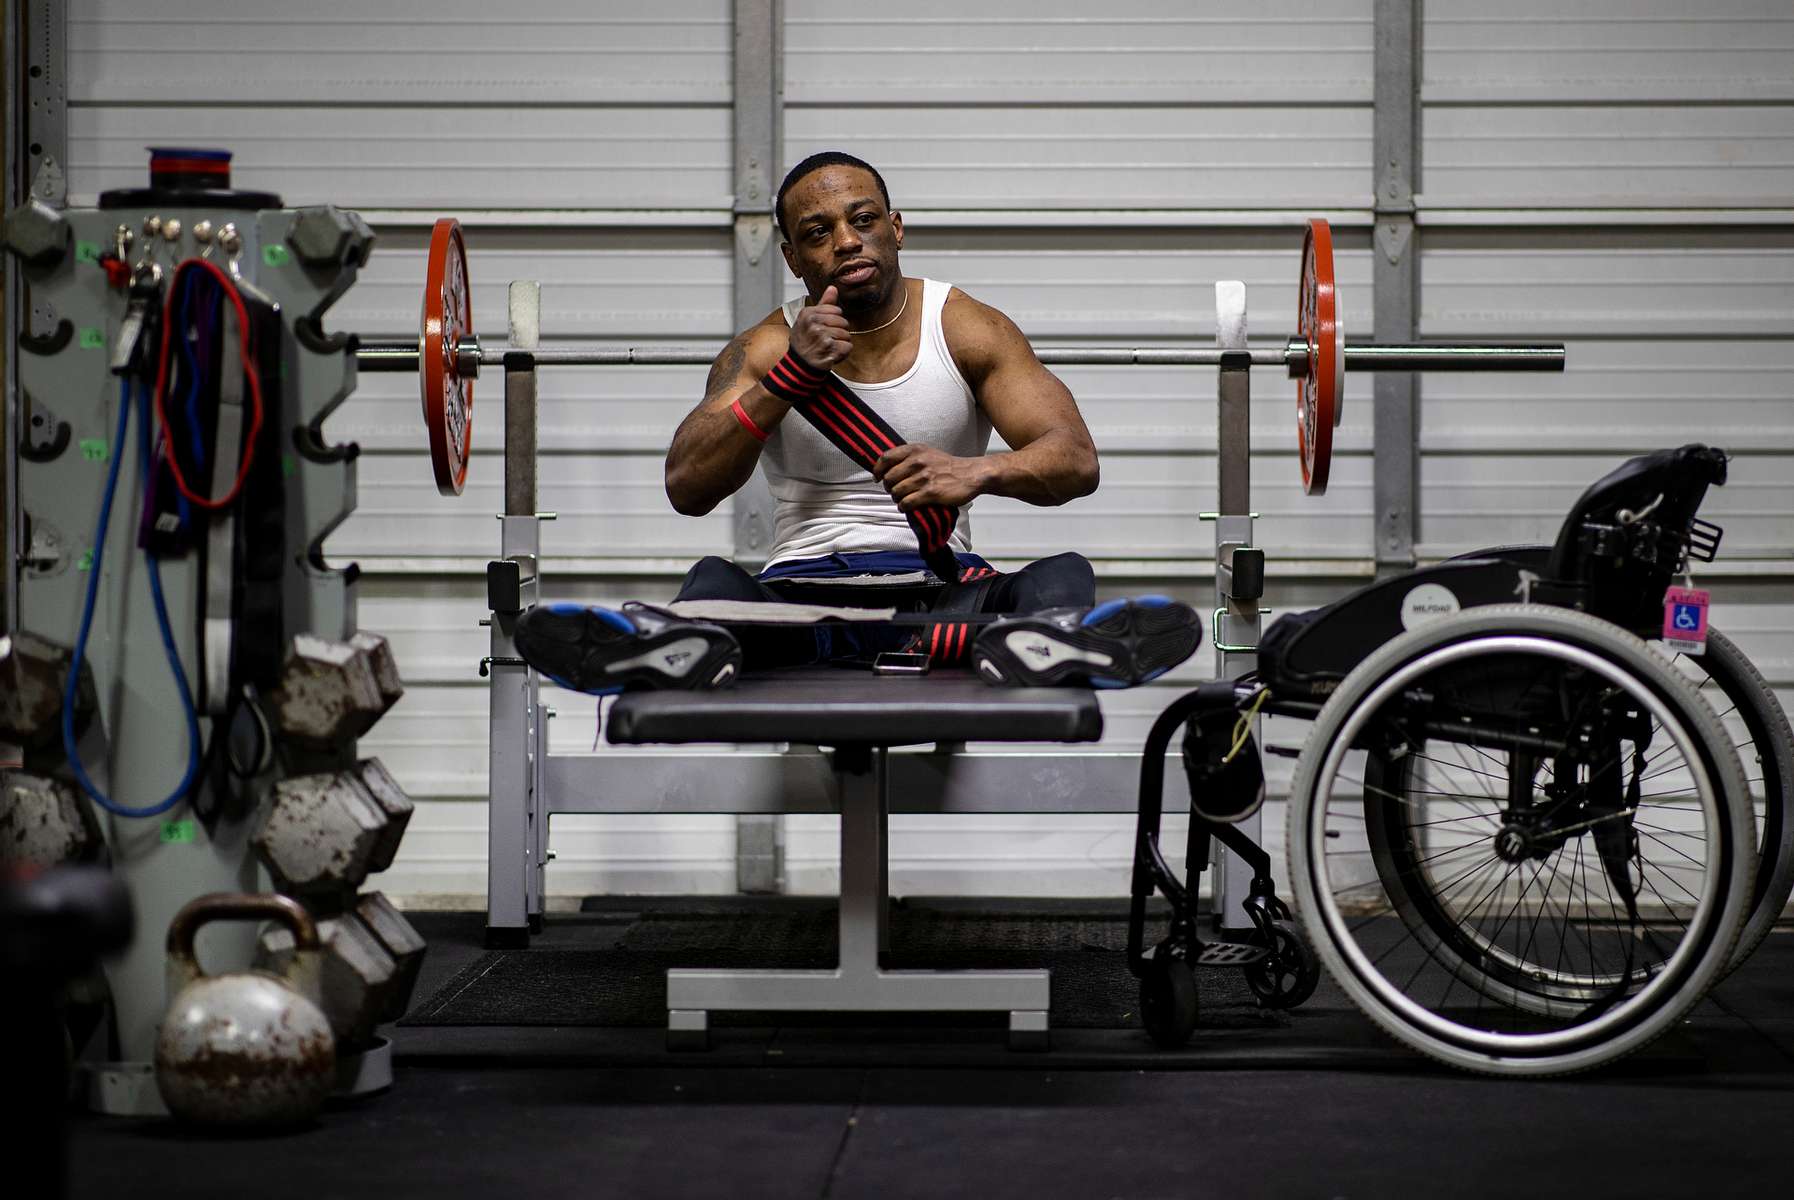 Team USA Para Powerlifter Garrison Redd wraps his wrists before bench pressing with his legs strapped to the bench to secure his body in place during a training session at Gaglione Strength Gym on April 07, 2021 in Farmingdale, New York. 